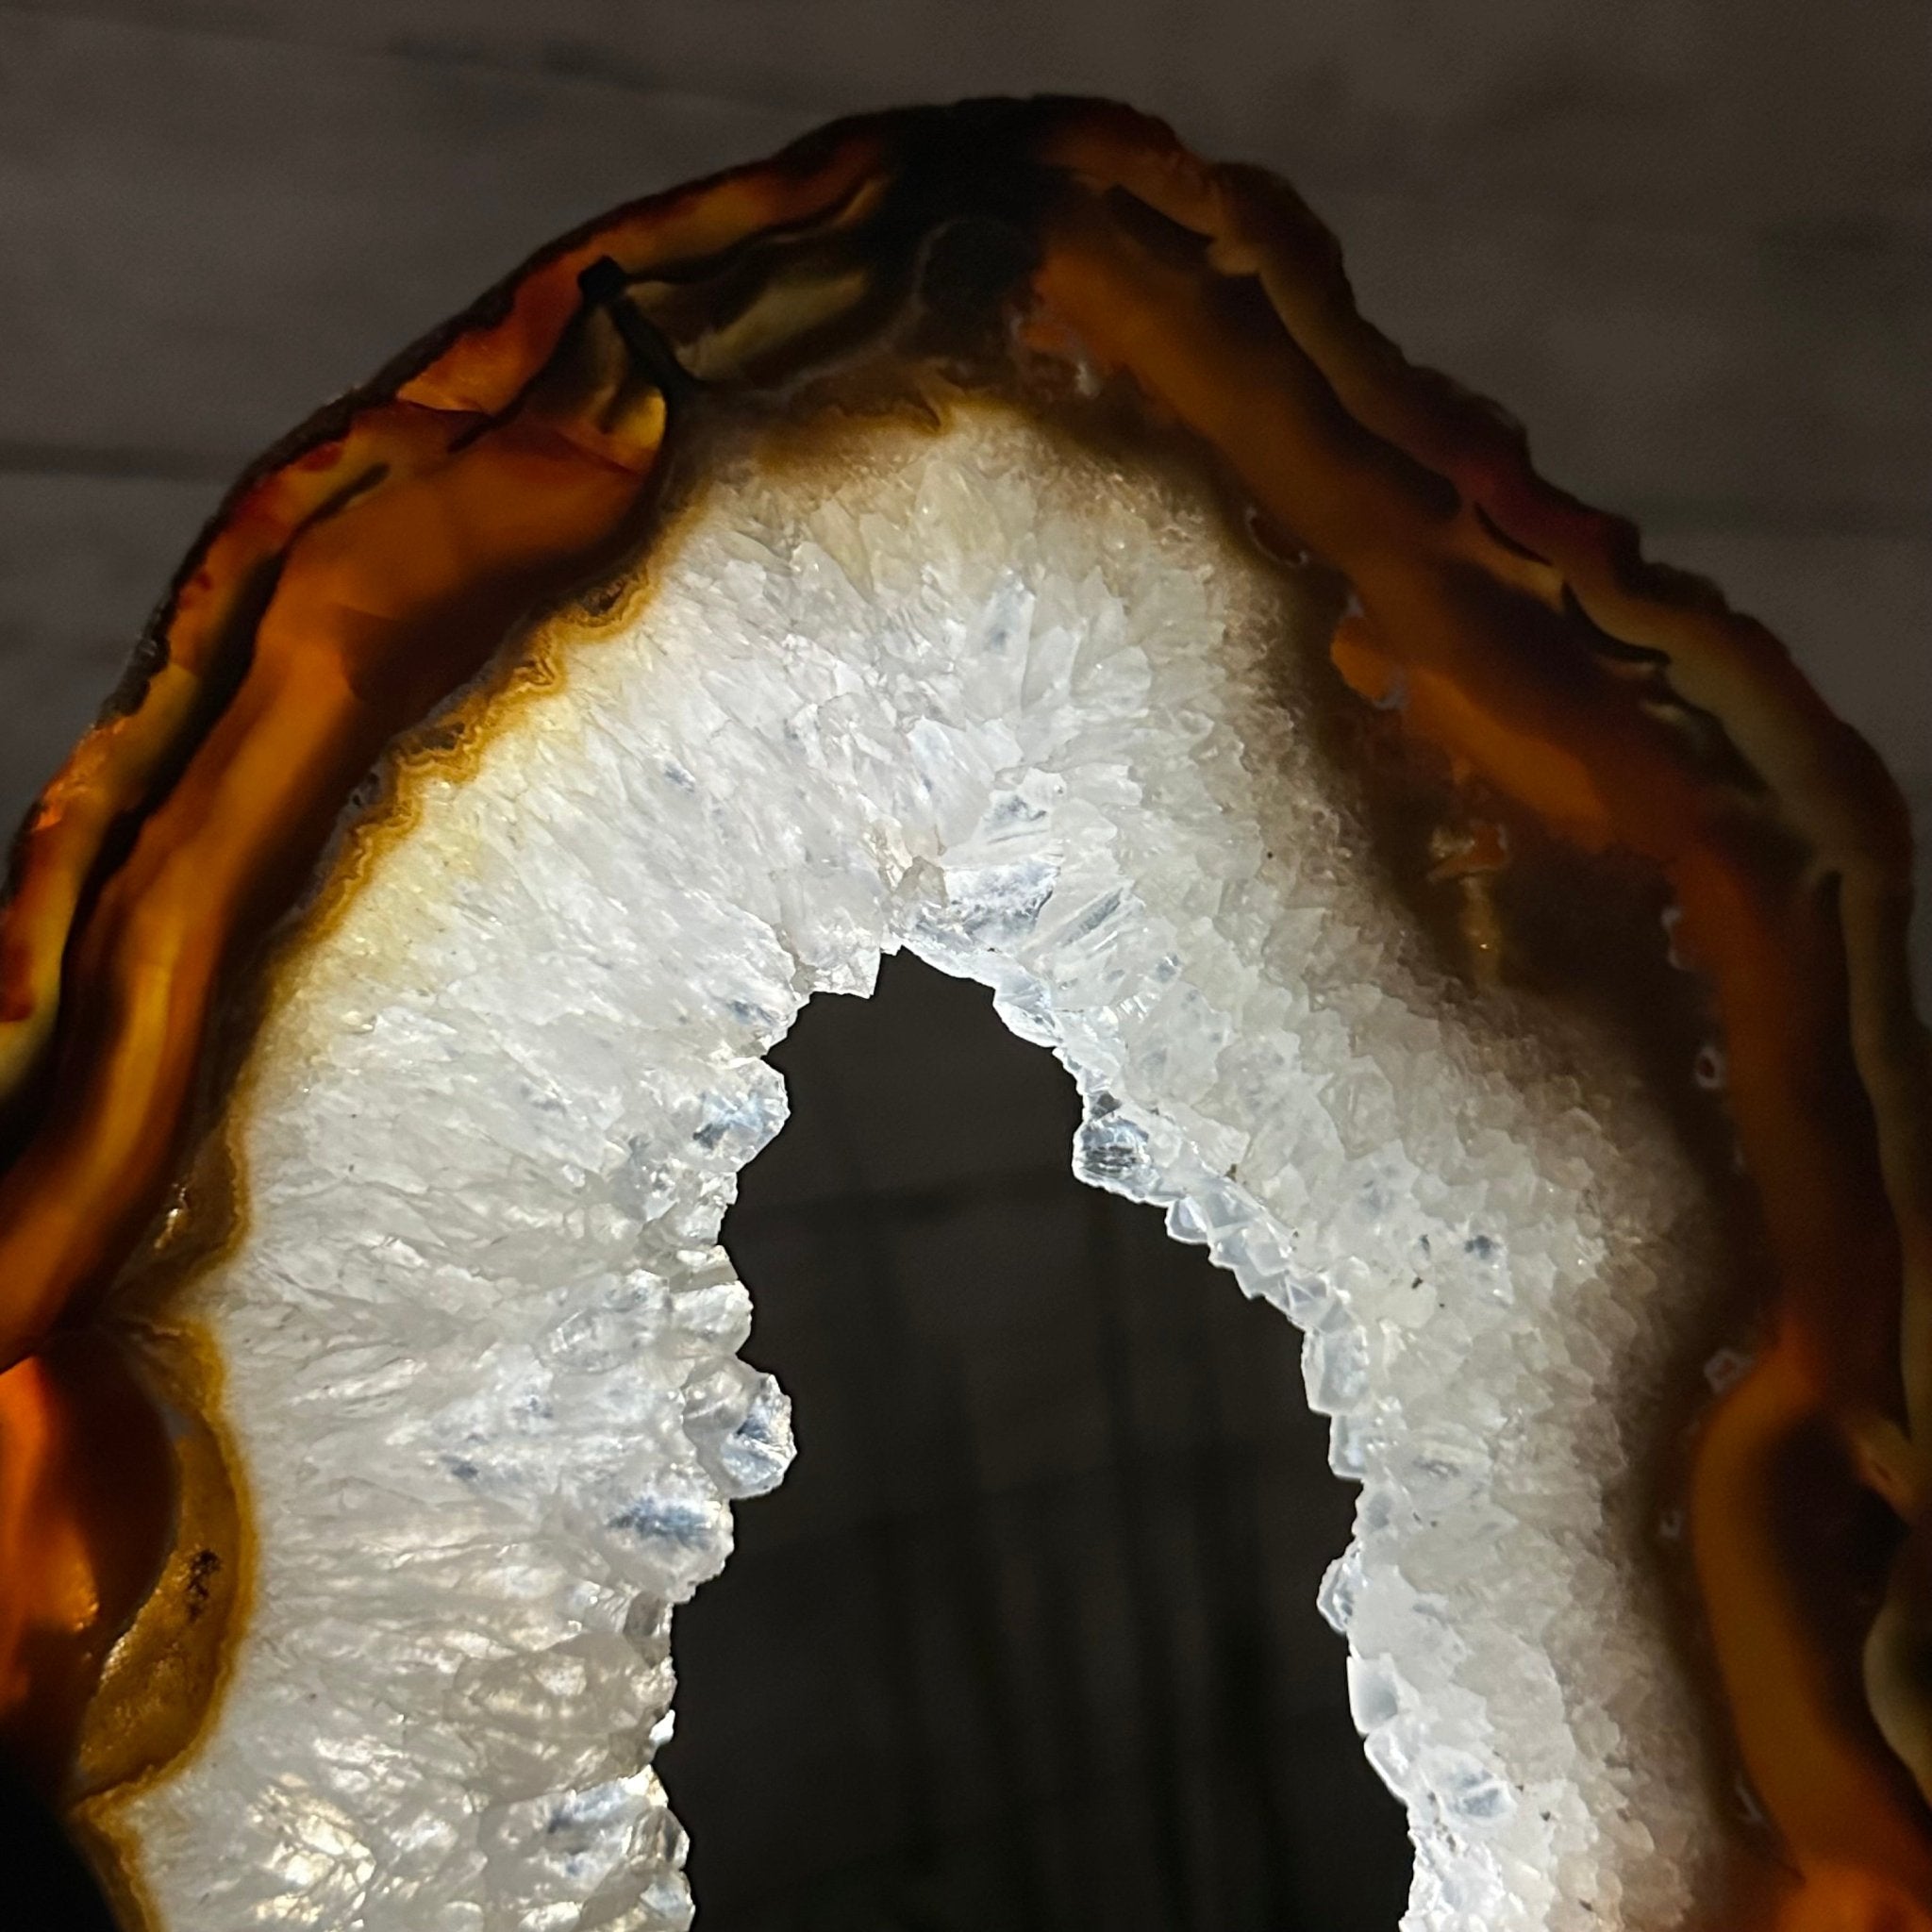 Natural Brazilian Agate "Butterfly Wings", 15" Tall #5050NA-087 - Brazil GemsBrazil GemsNatural Brazilian Agate "Butterfly Wings", 15" Tall #5050NA-087Agate Butterfly Wings5050NA-087